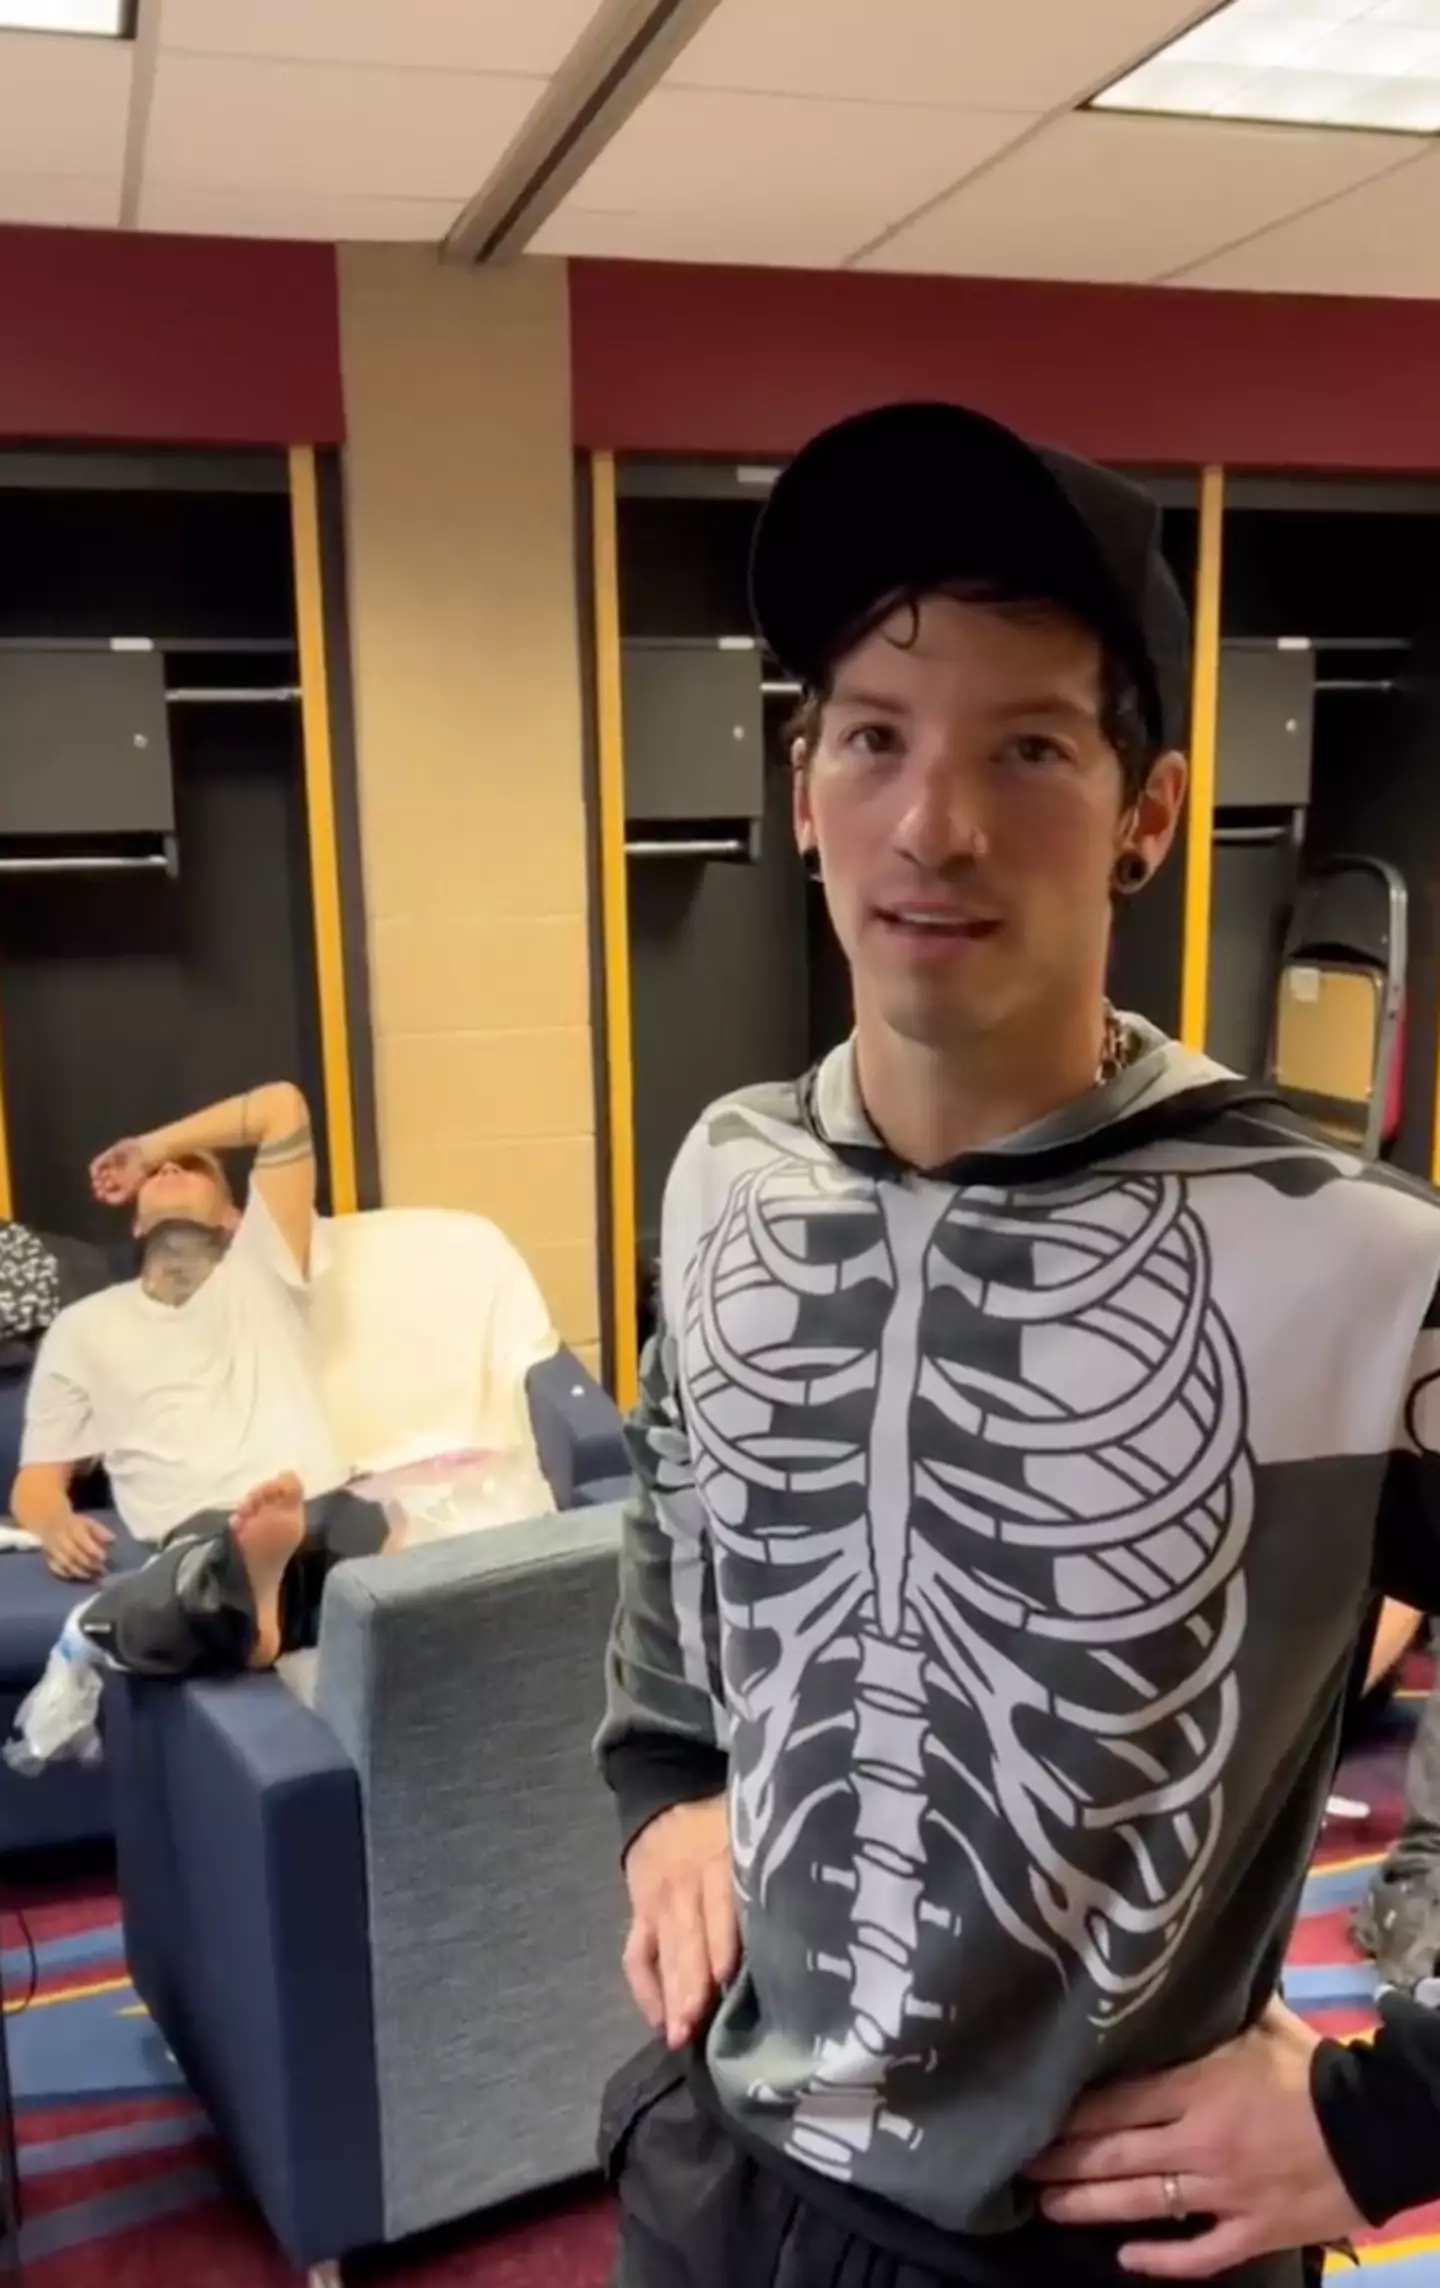 Josh Dun explained what had happened in a video to fans.